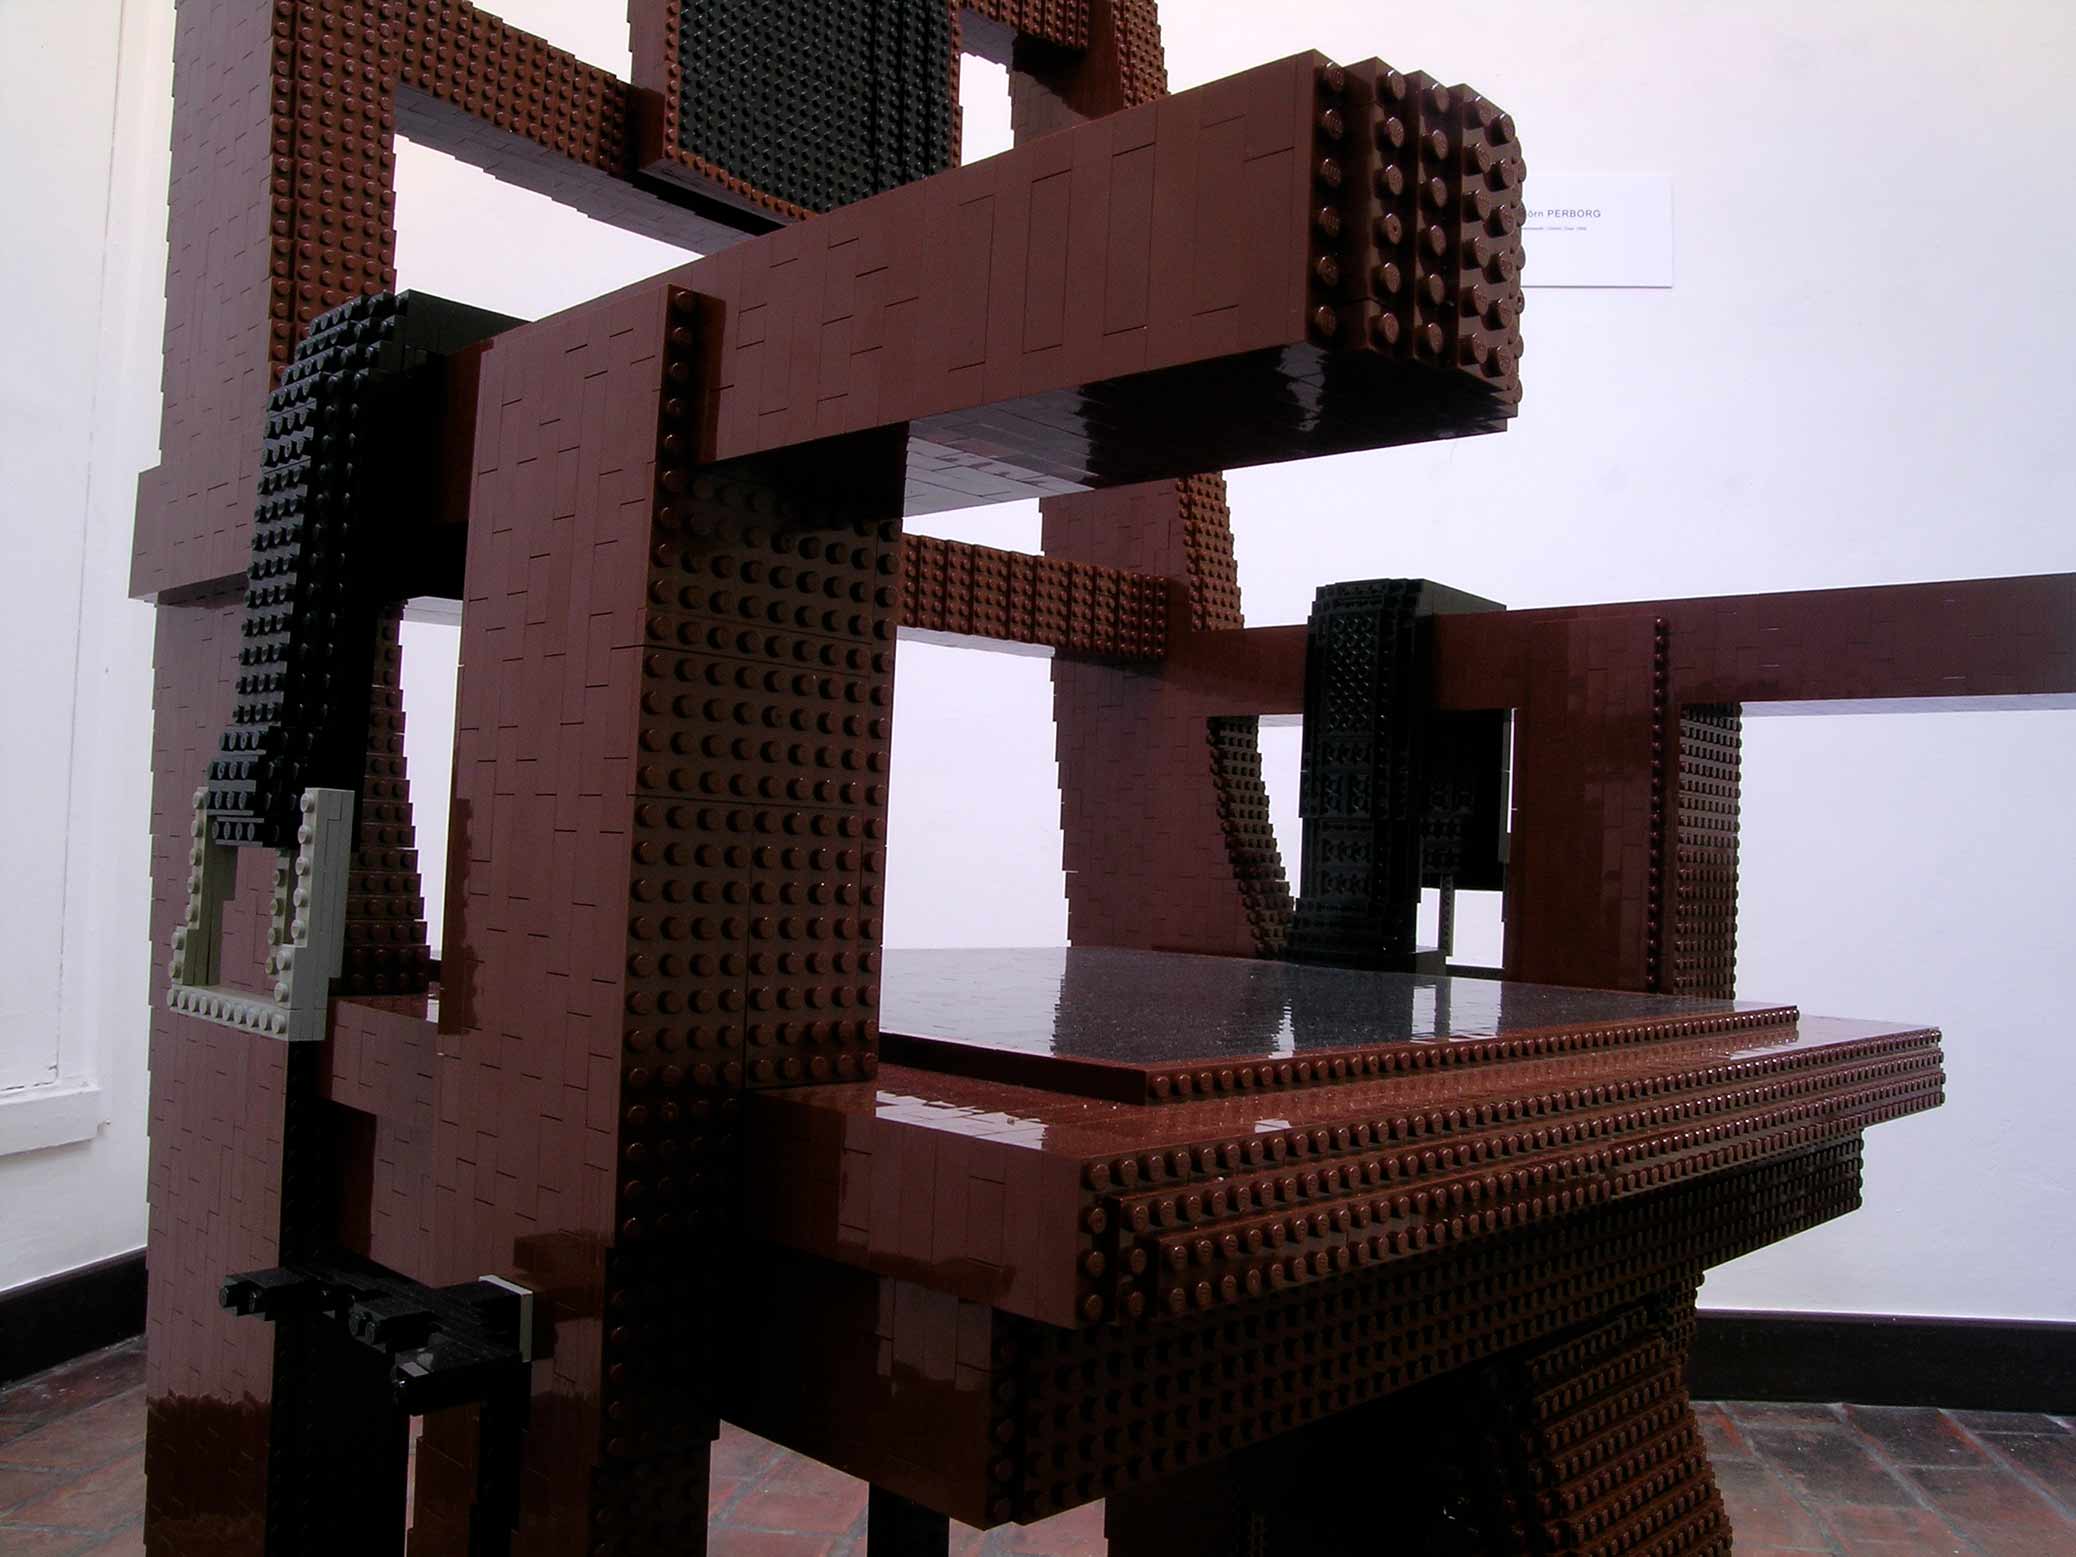 Electric Chair, sculpture made from LEGO, detail.